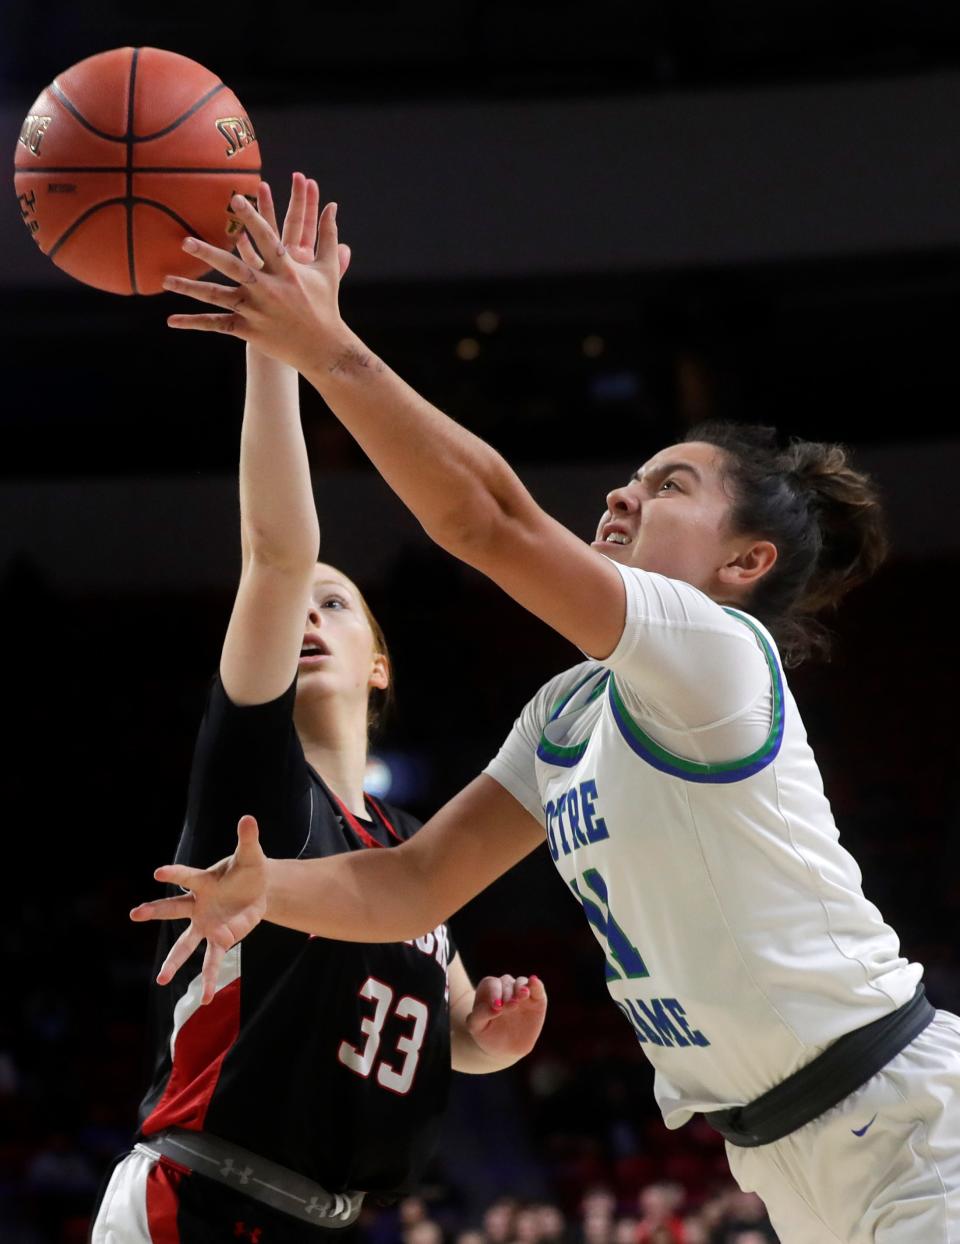 Green Bay Notre Dame's Sydney Whitehouse, right, puts up a shot against Pewaukee during the WIAA Division 2 state championship game March 9 at the Resch Center in Ashwaubenon.